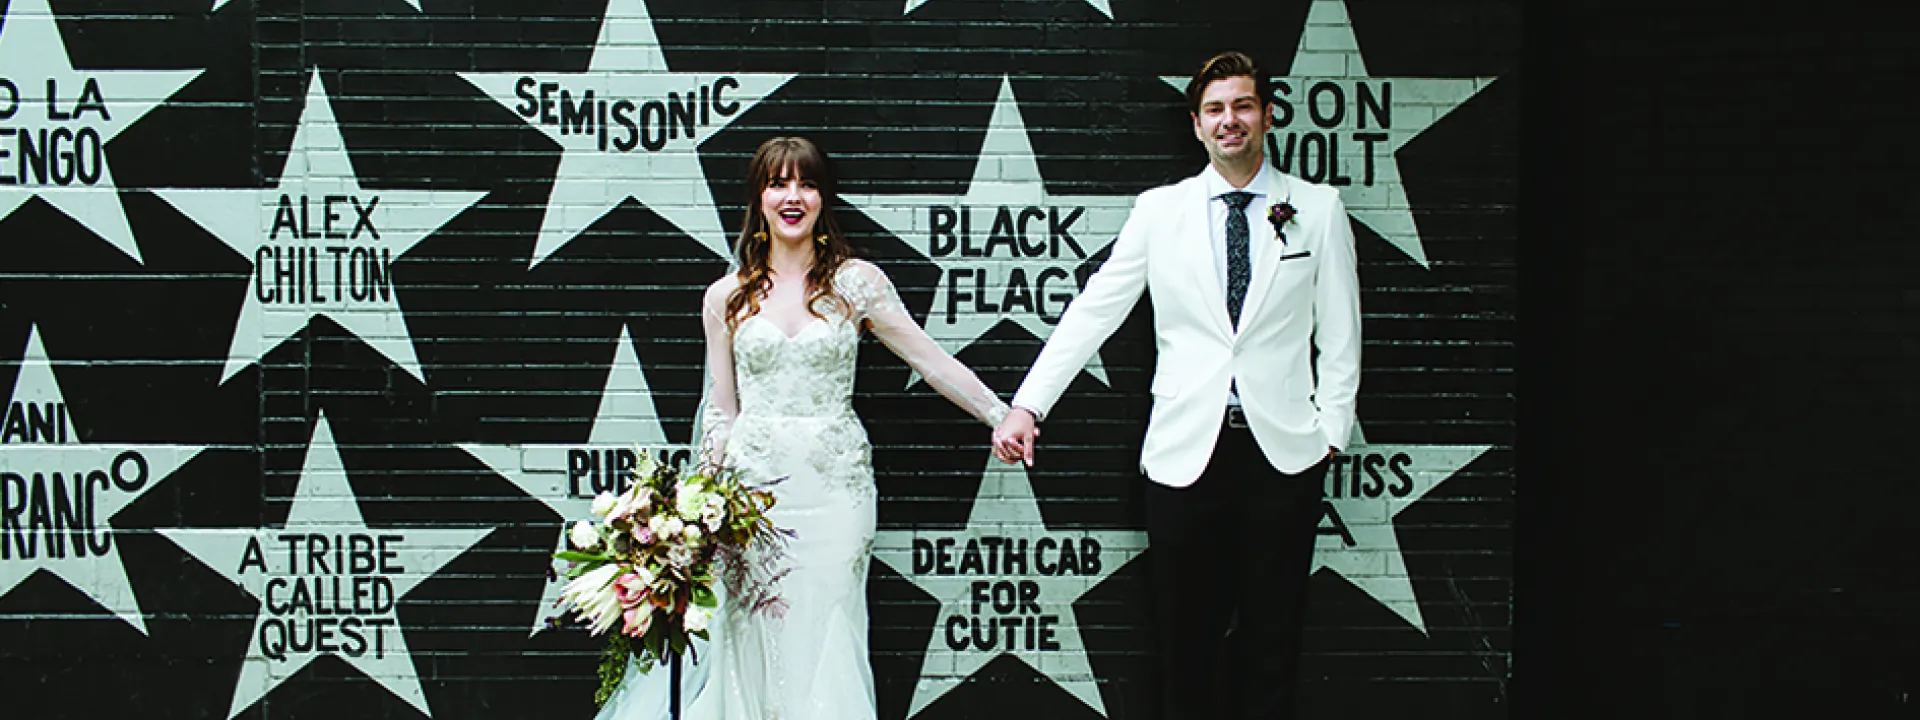 Sarah and Scott pose for a wedding photo in front of First Avenue.